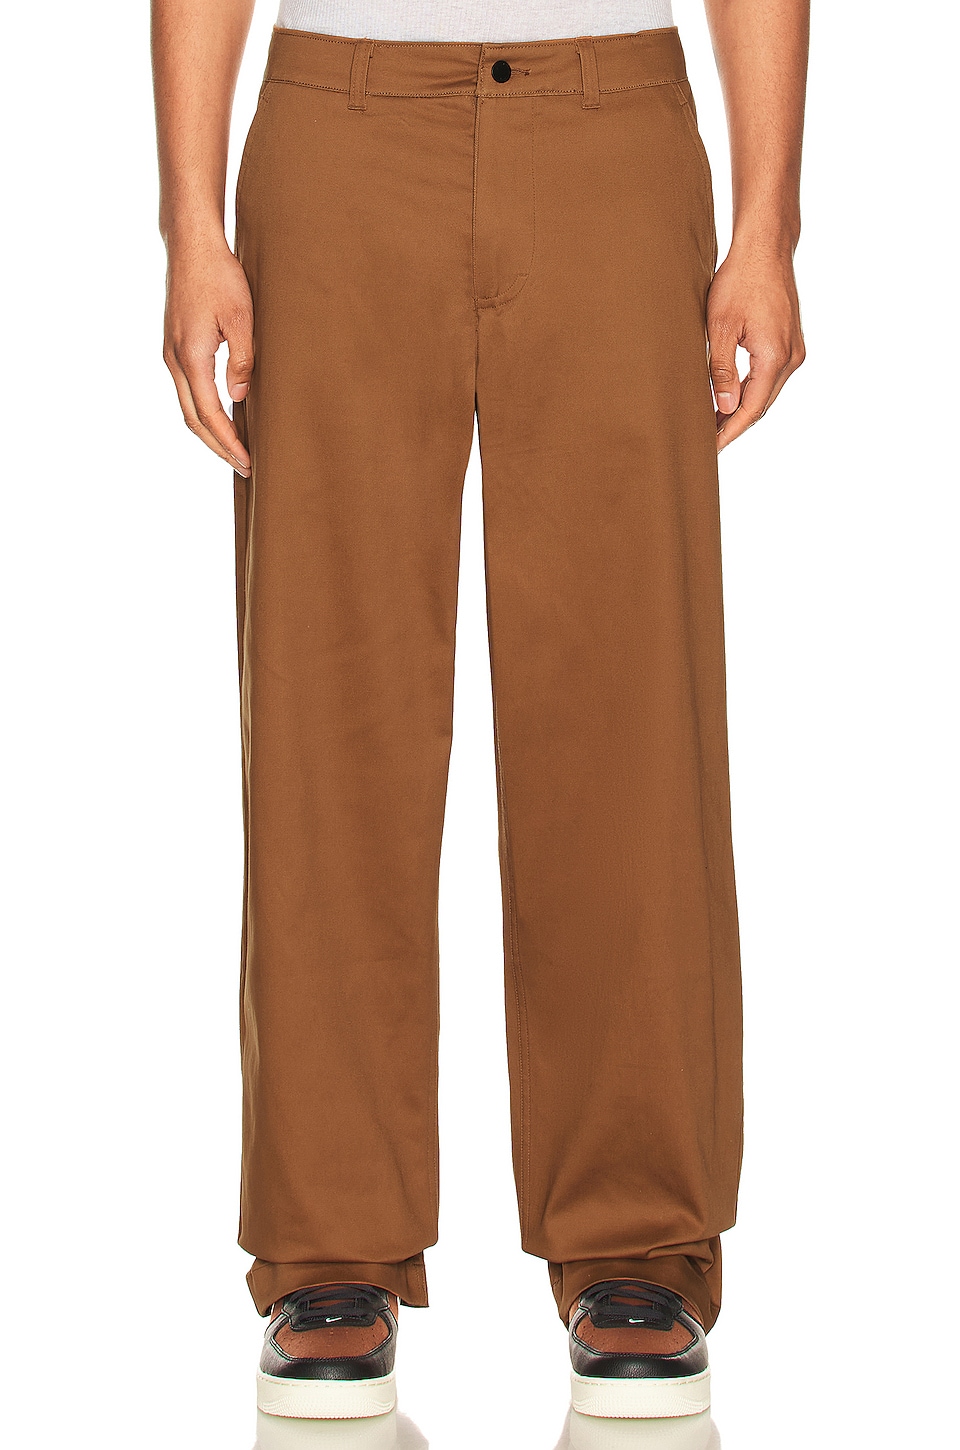 Nike M Nl Chino Ul Ale in REVOLVE | Brown/White El Pant Cotton